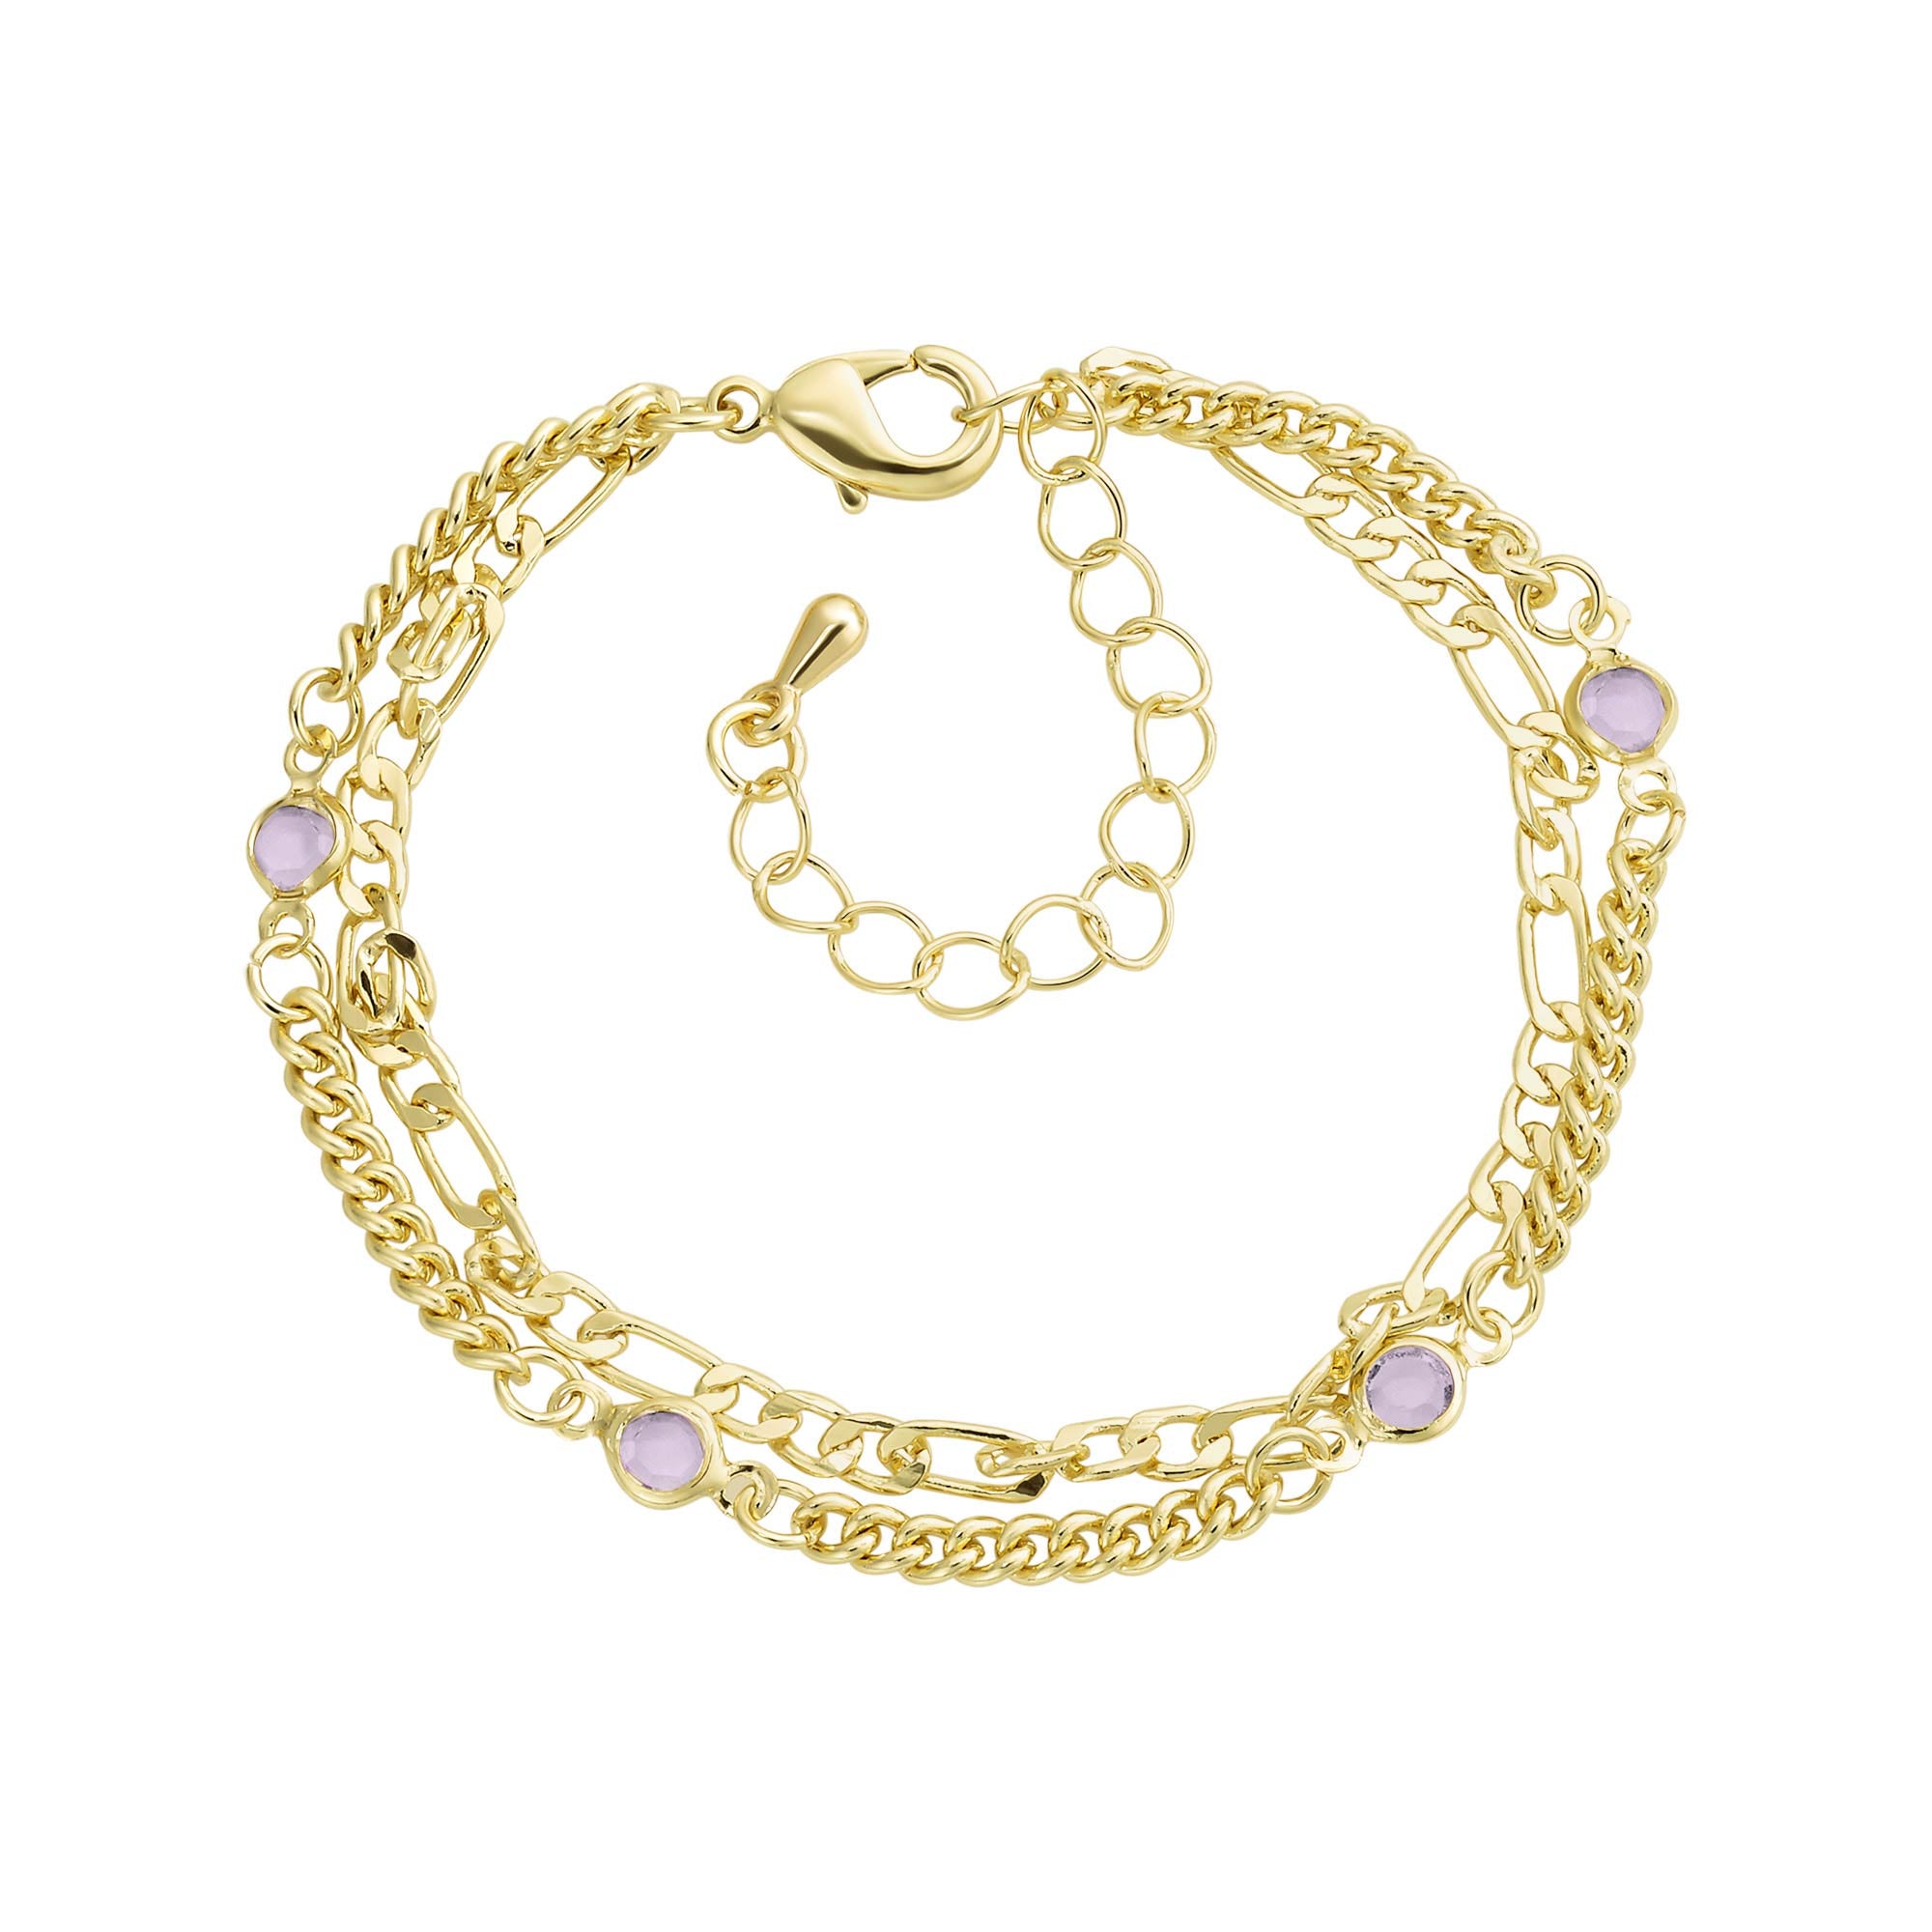 Stacked Diamond By The Yard Bracelet in Lavender